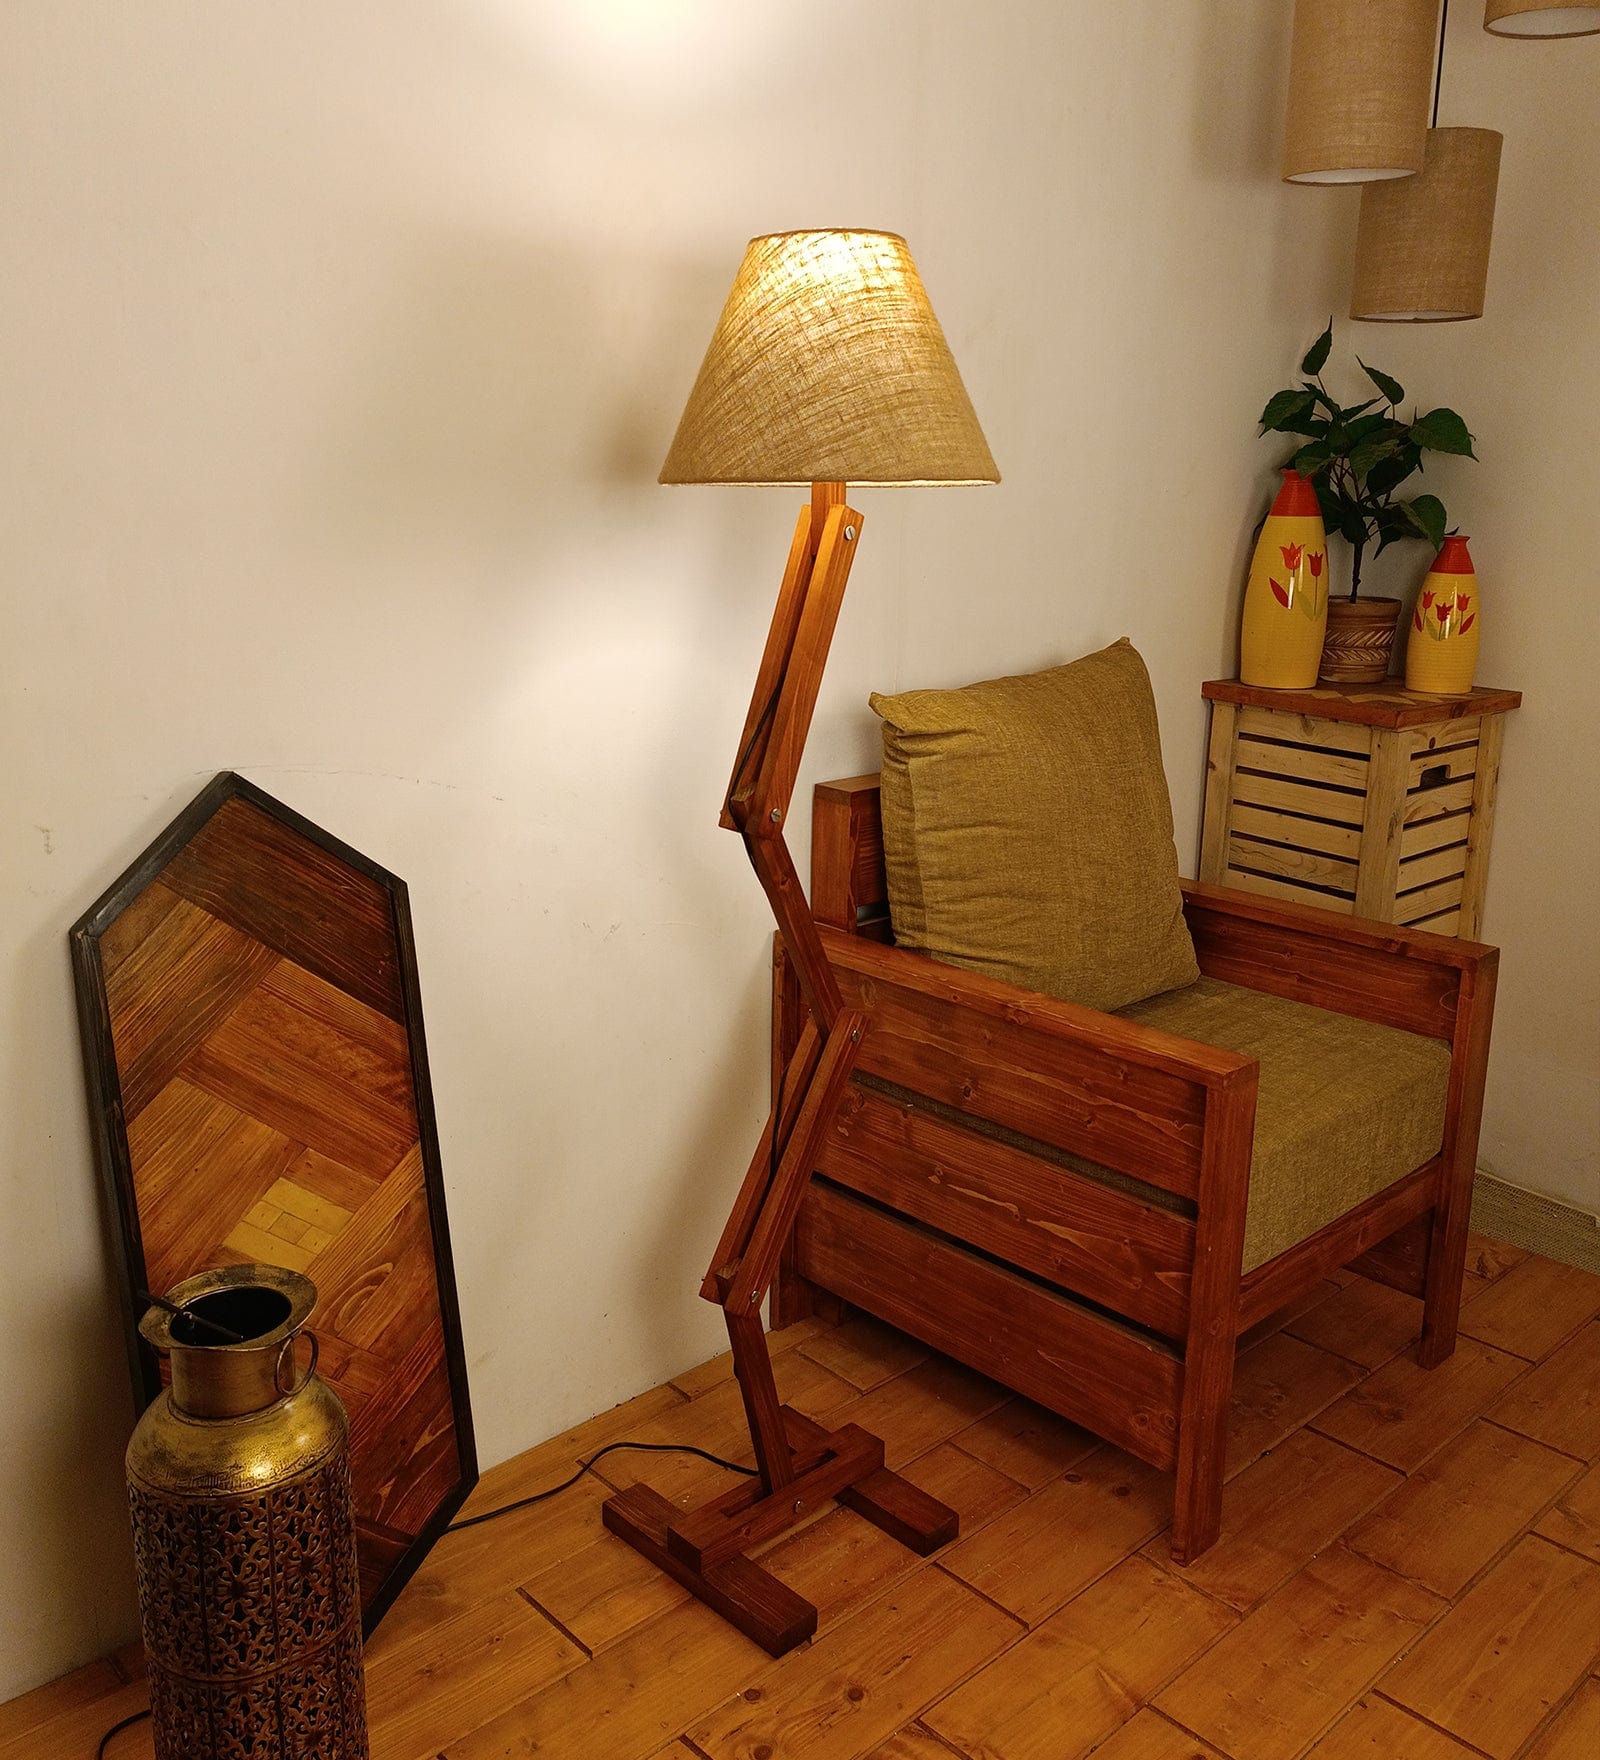 Flex Wooden Floor Lamp with Brown Base and Beige Fabric Lampshade (BULB NOT INCLUDED)